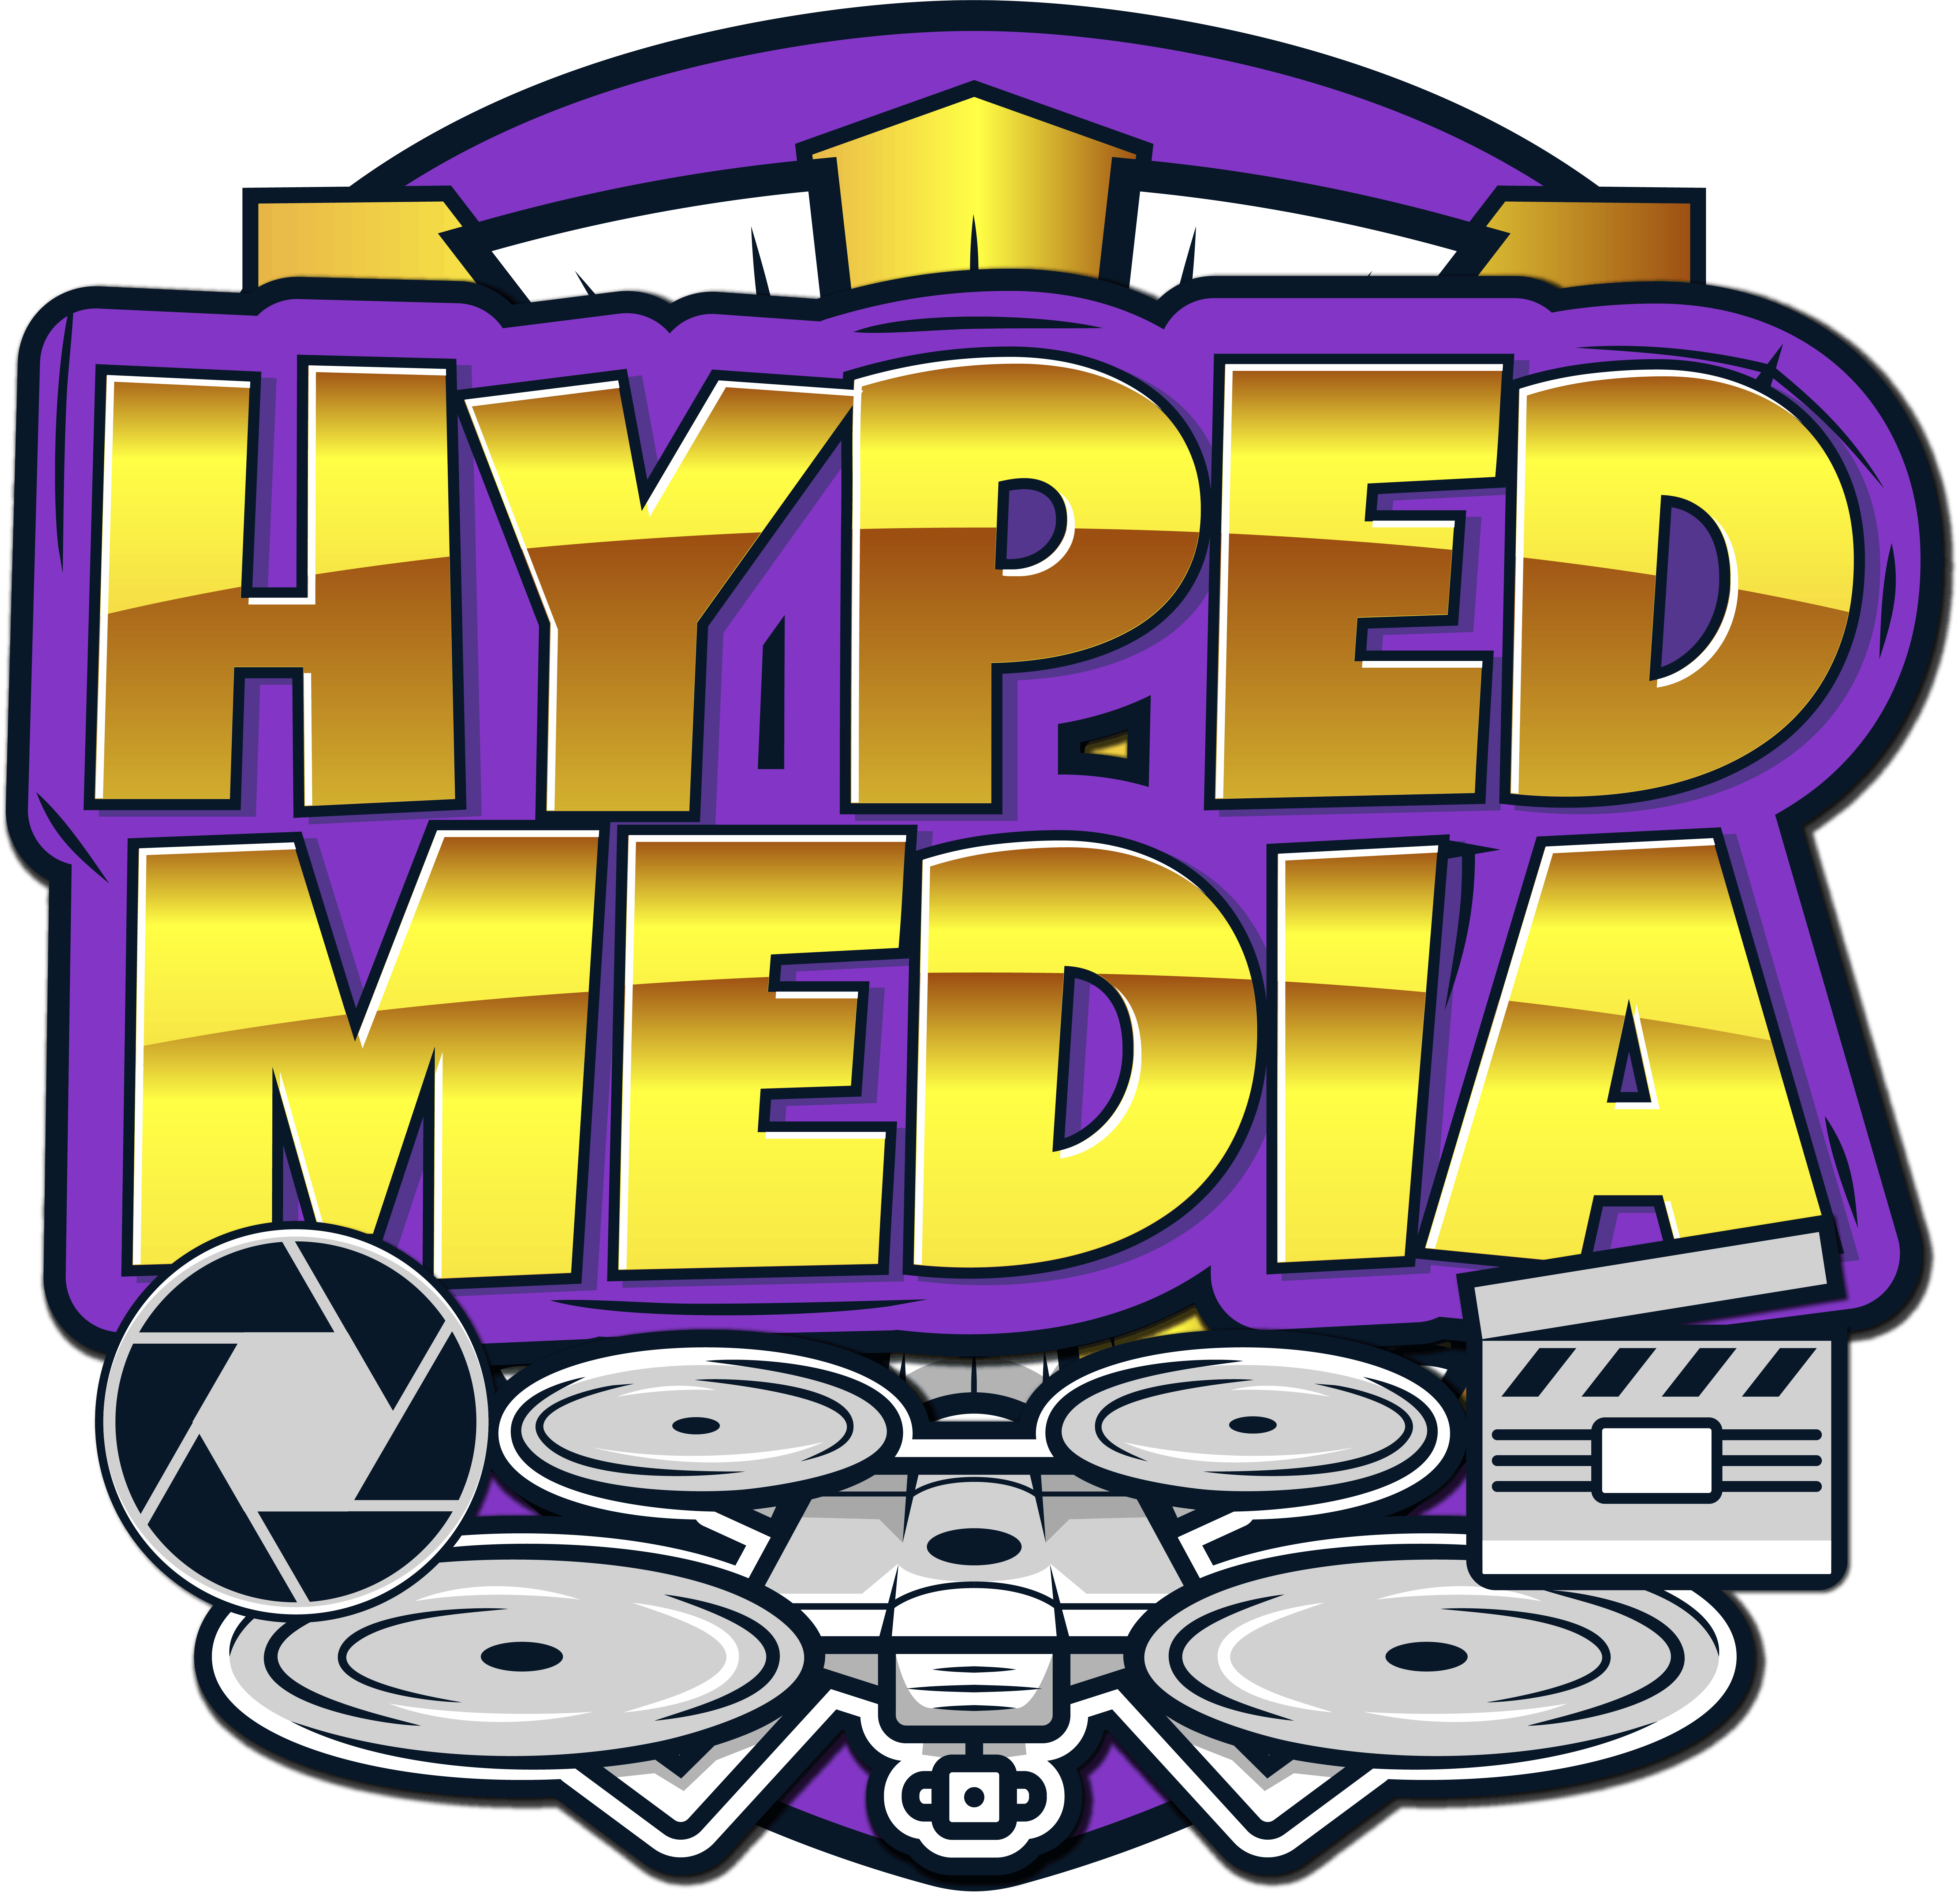 Hyped Media - Our Story